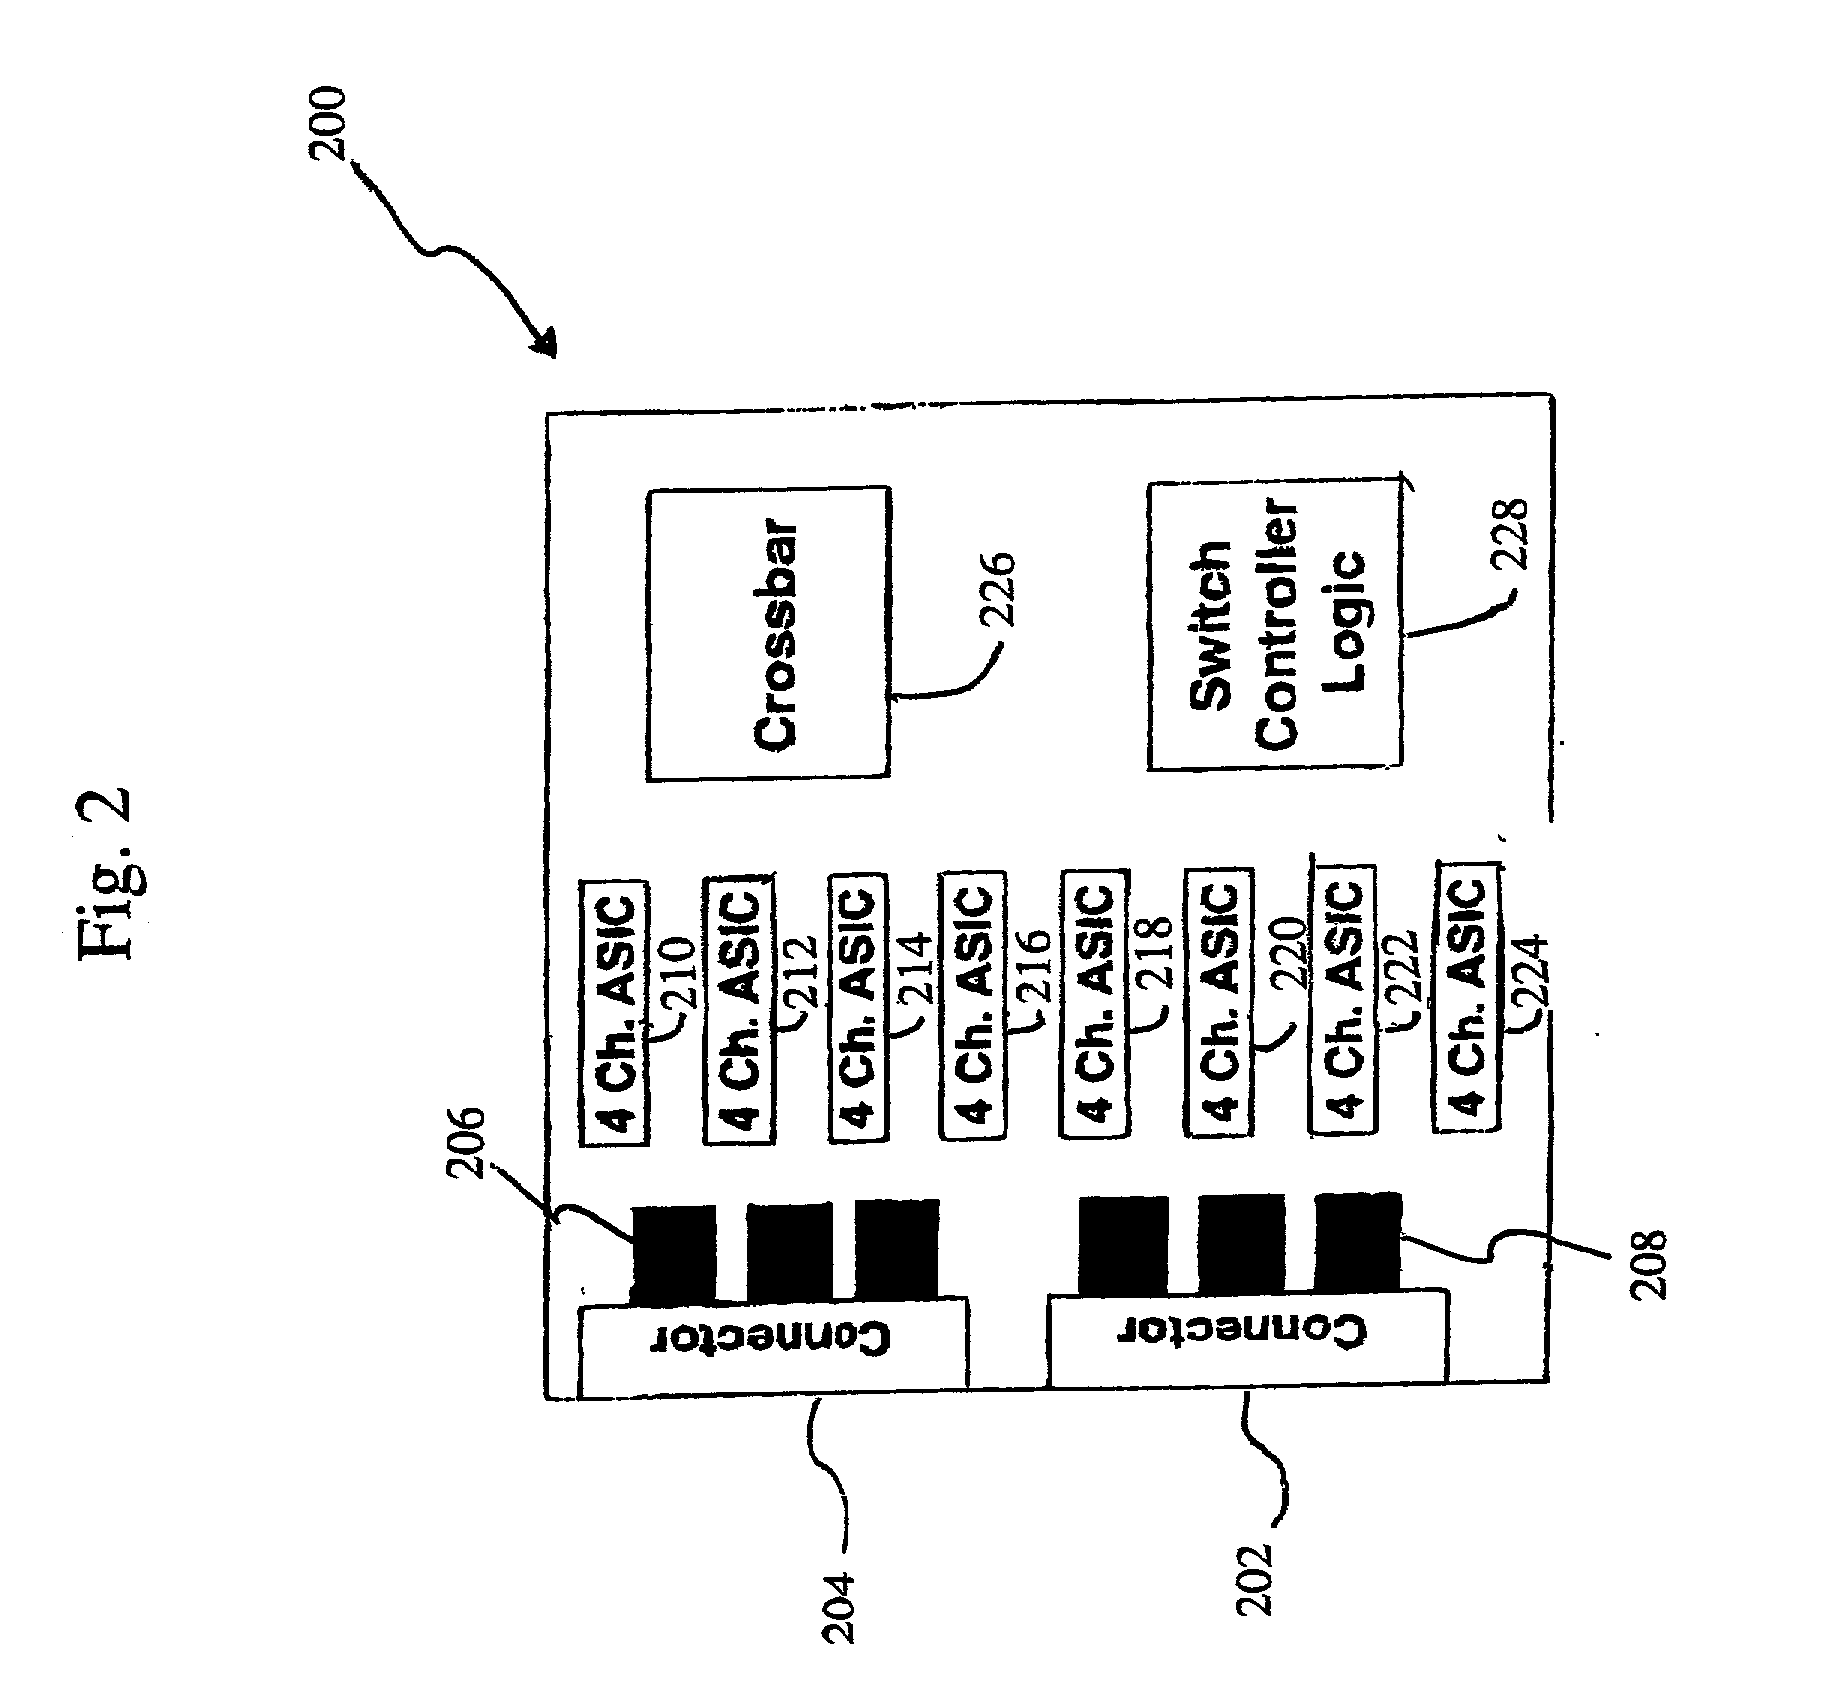 System and method for real-time fault reporting in switched networks